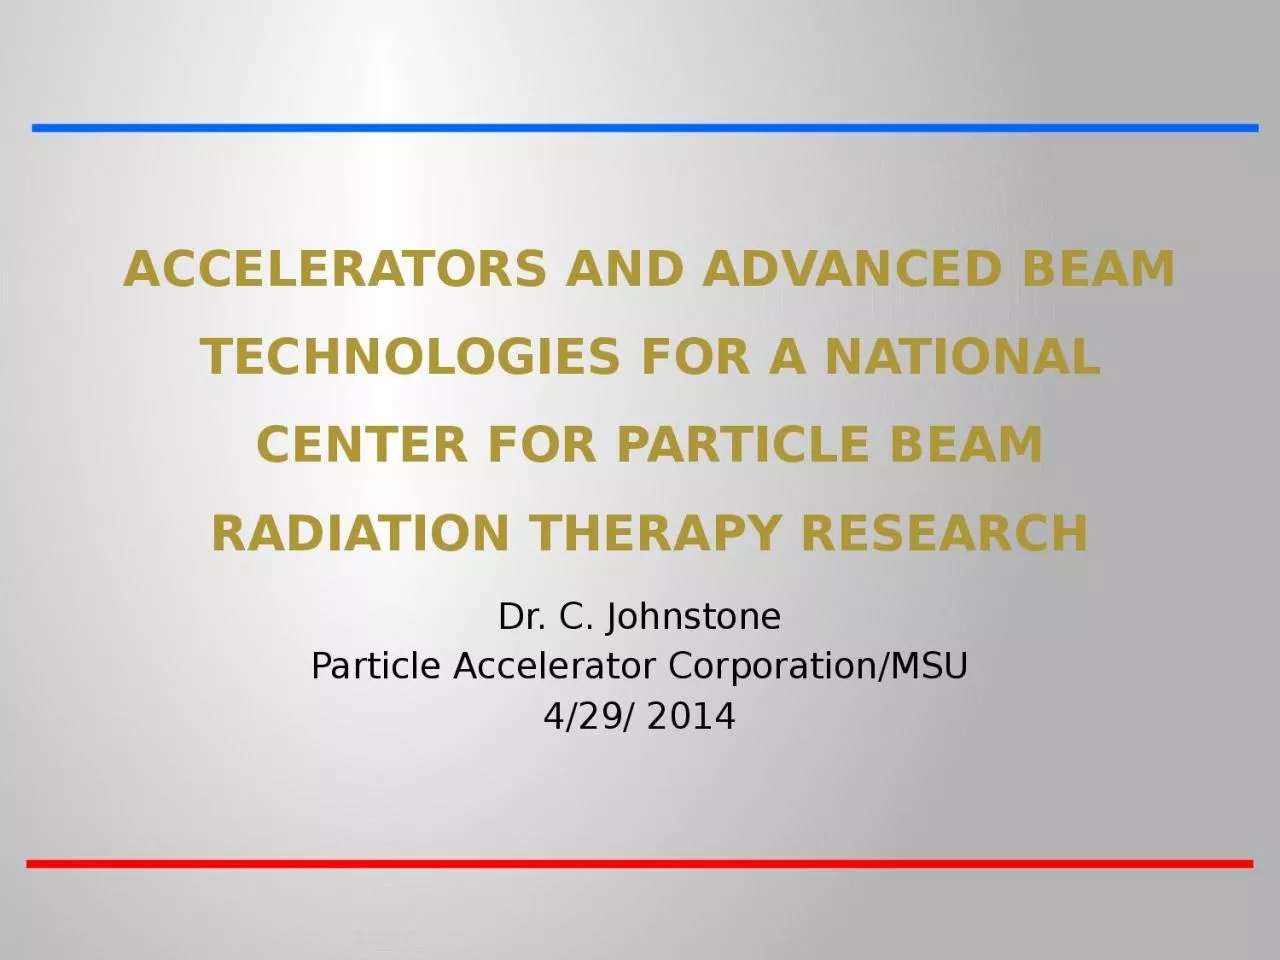 Accelerators and advanced beam technologies for a national center for particle beam radiation